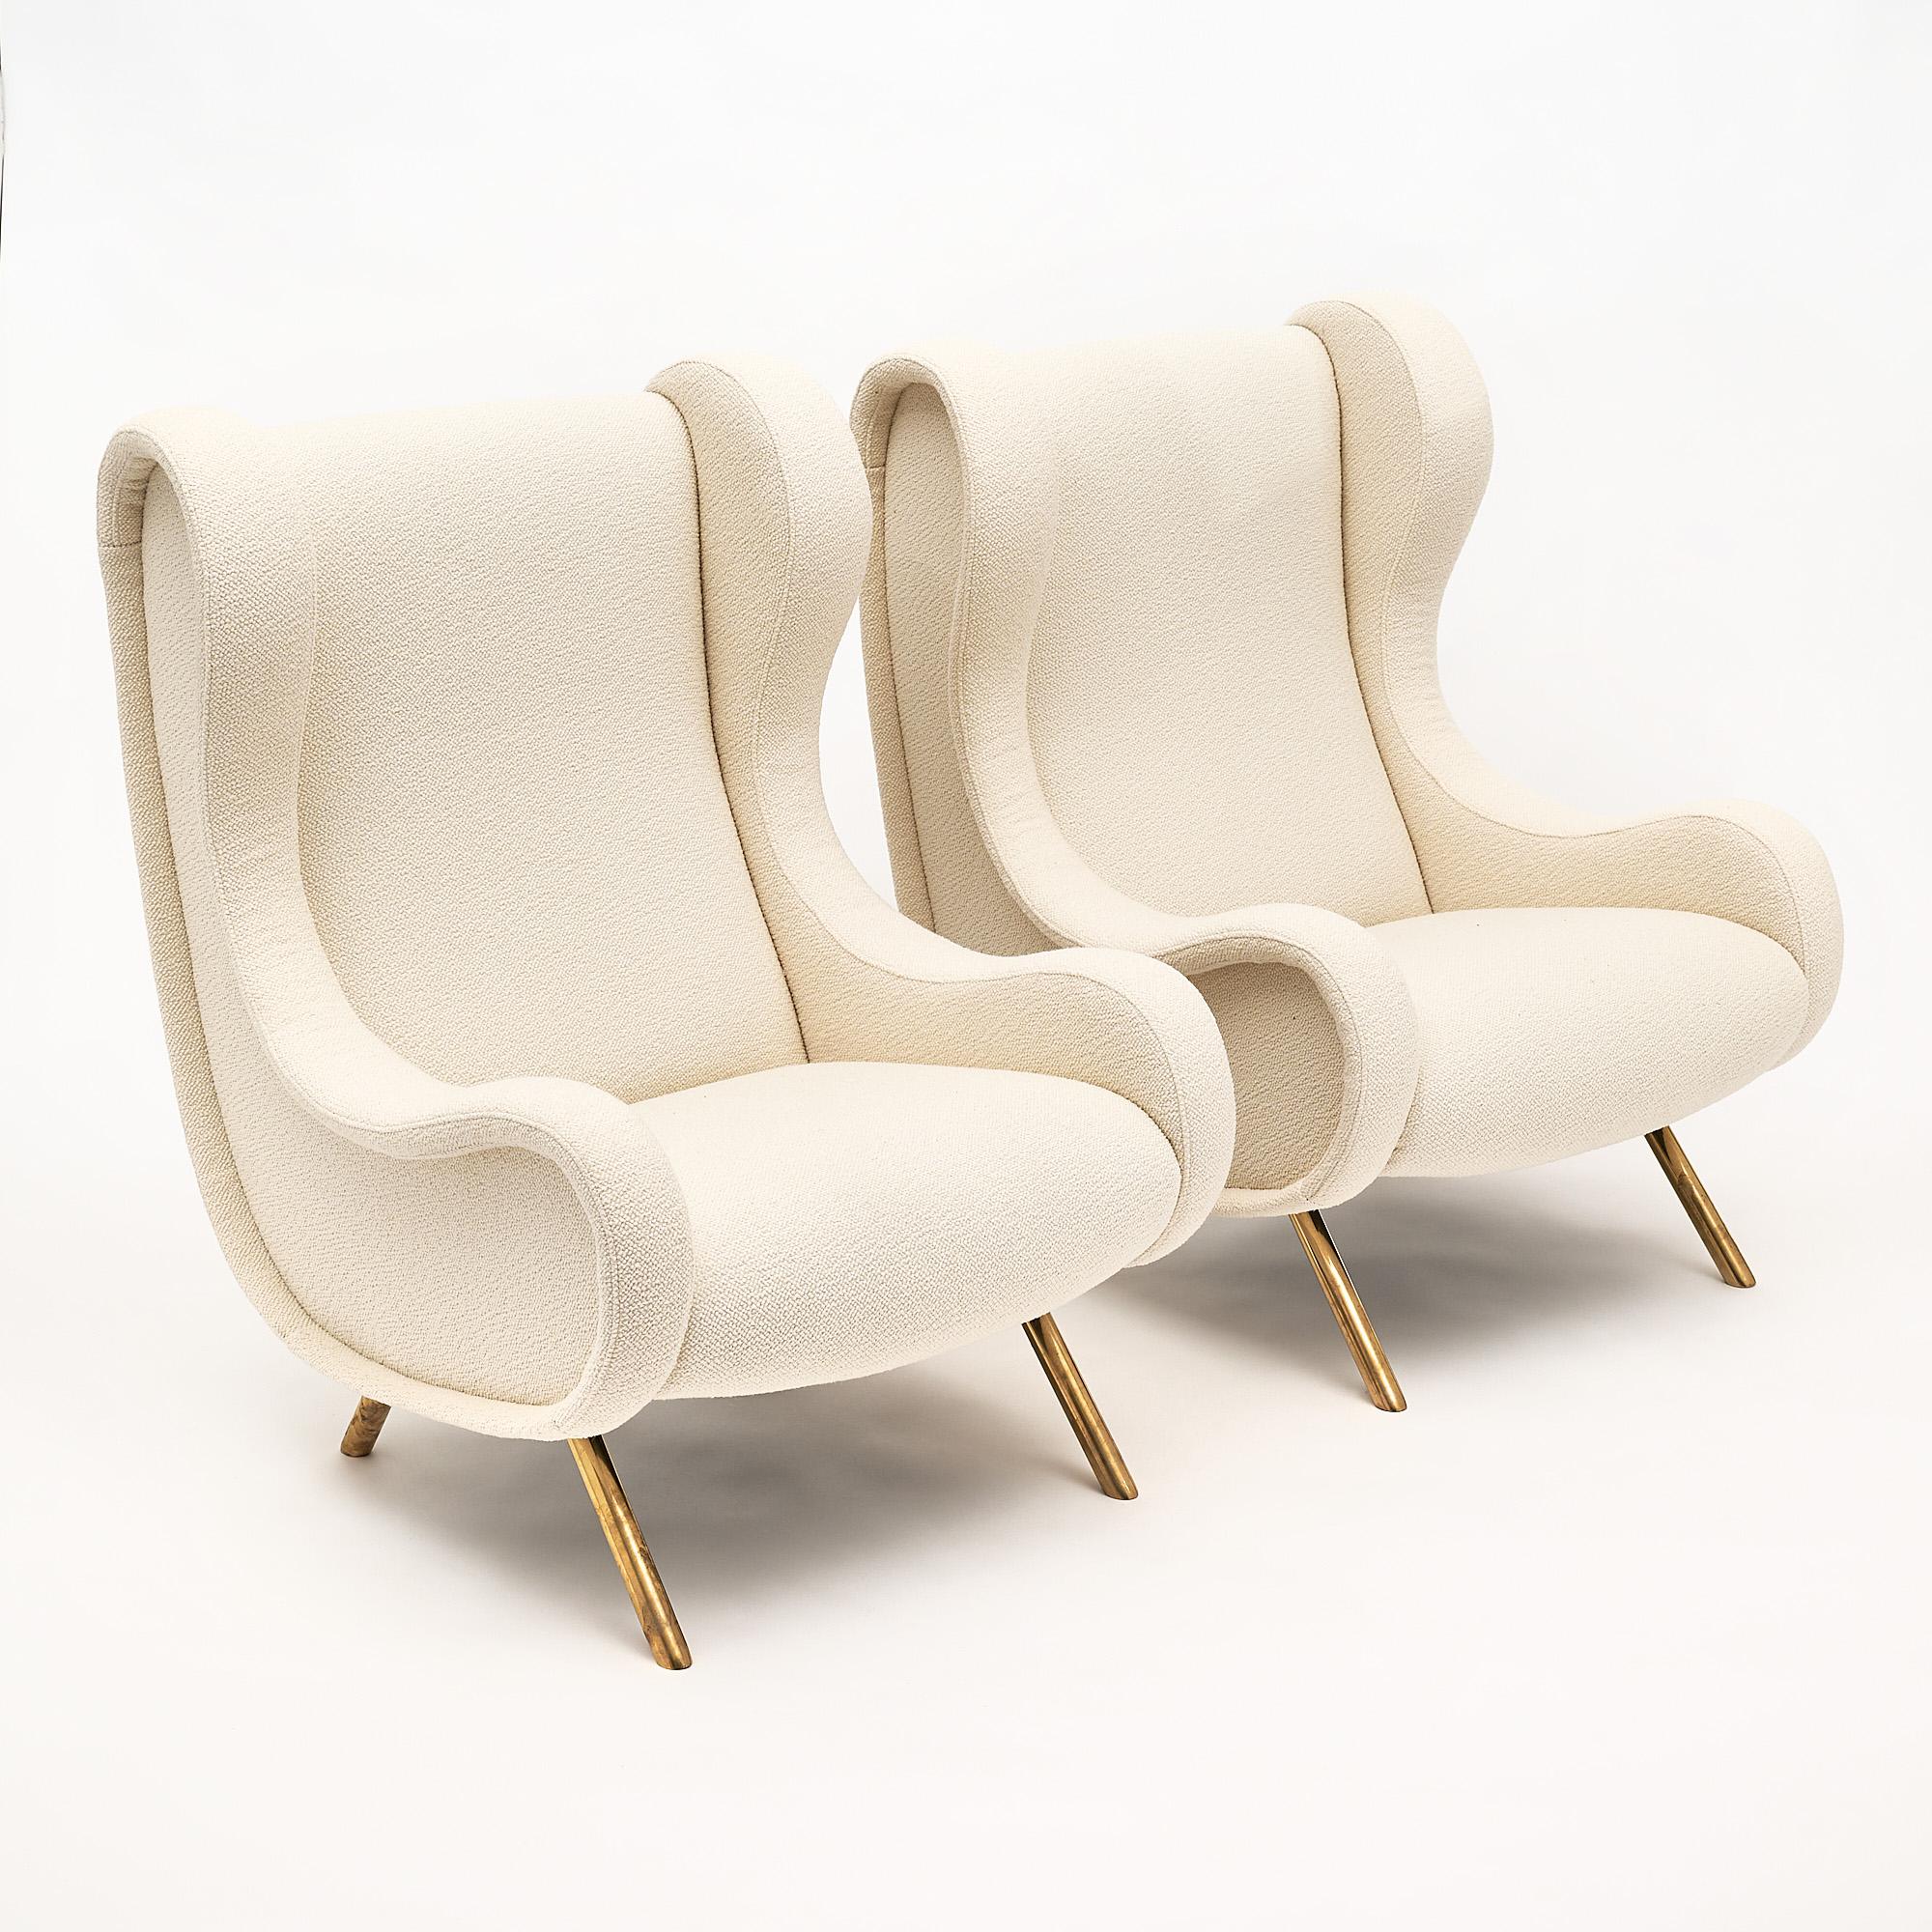 Pair of armchairs, Italian, attributed to Zanuso. Newly upholstered with a new wool blend fabric.